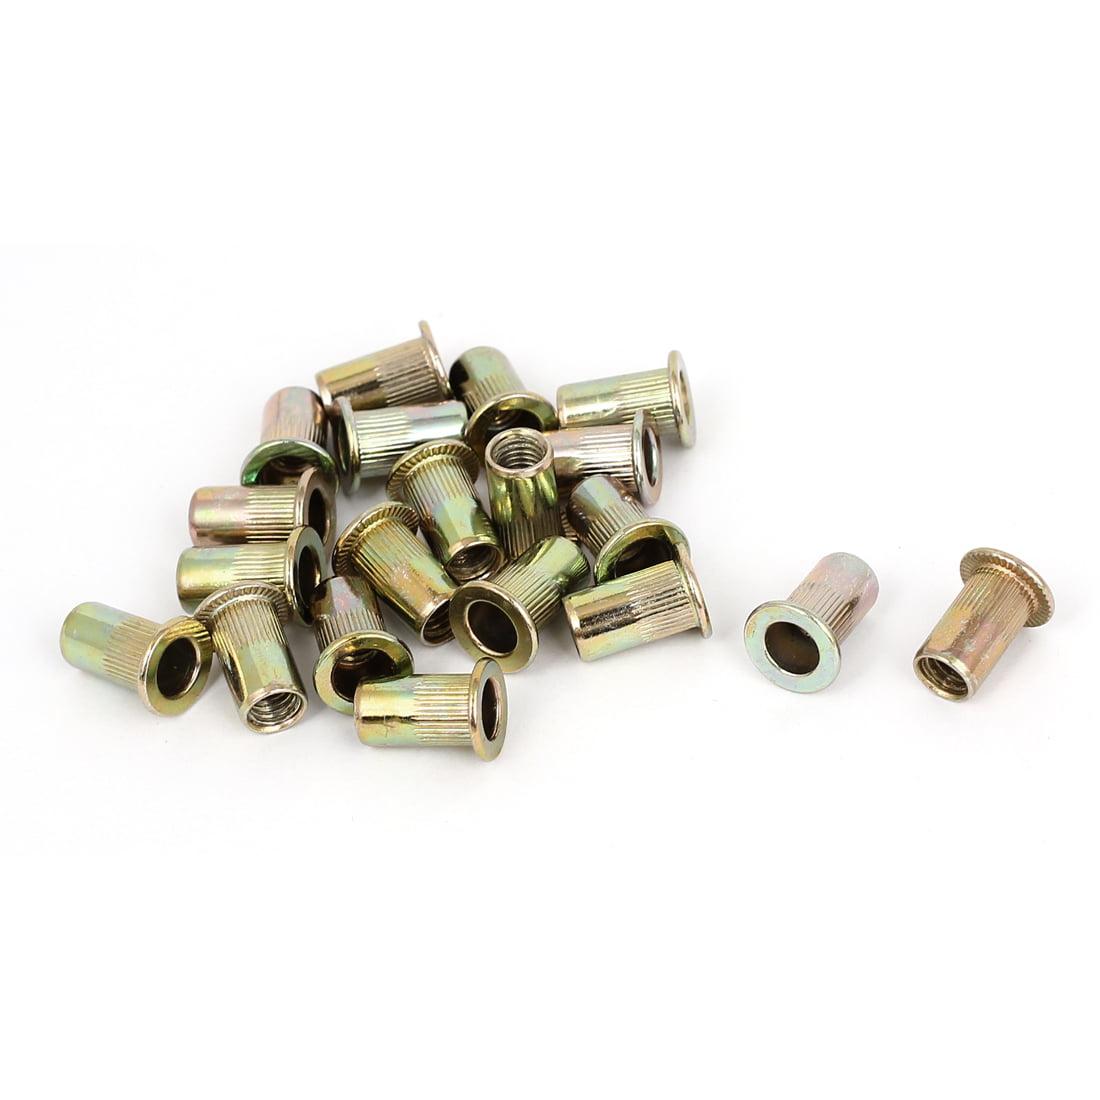 Zinc Plated M6 6mm Threaded Rivet Insert Riv Nuts Open End Knurled